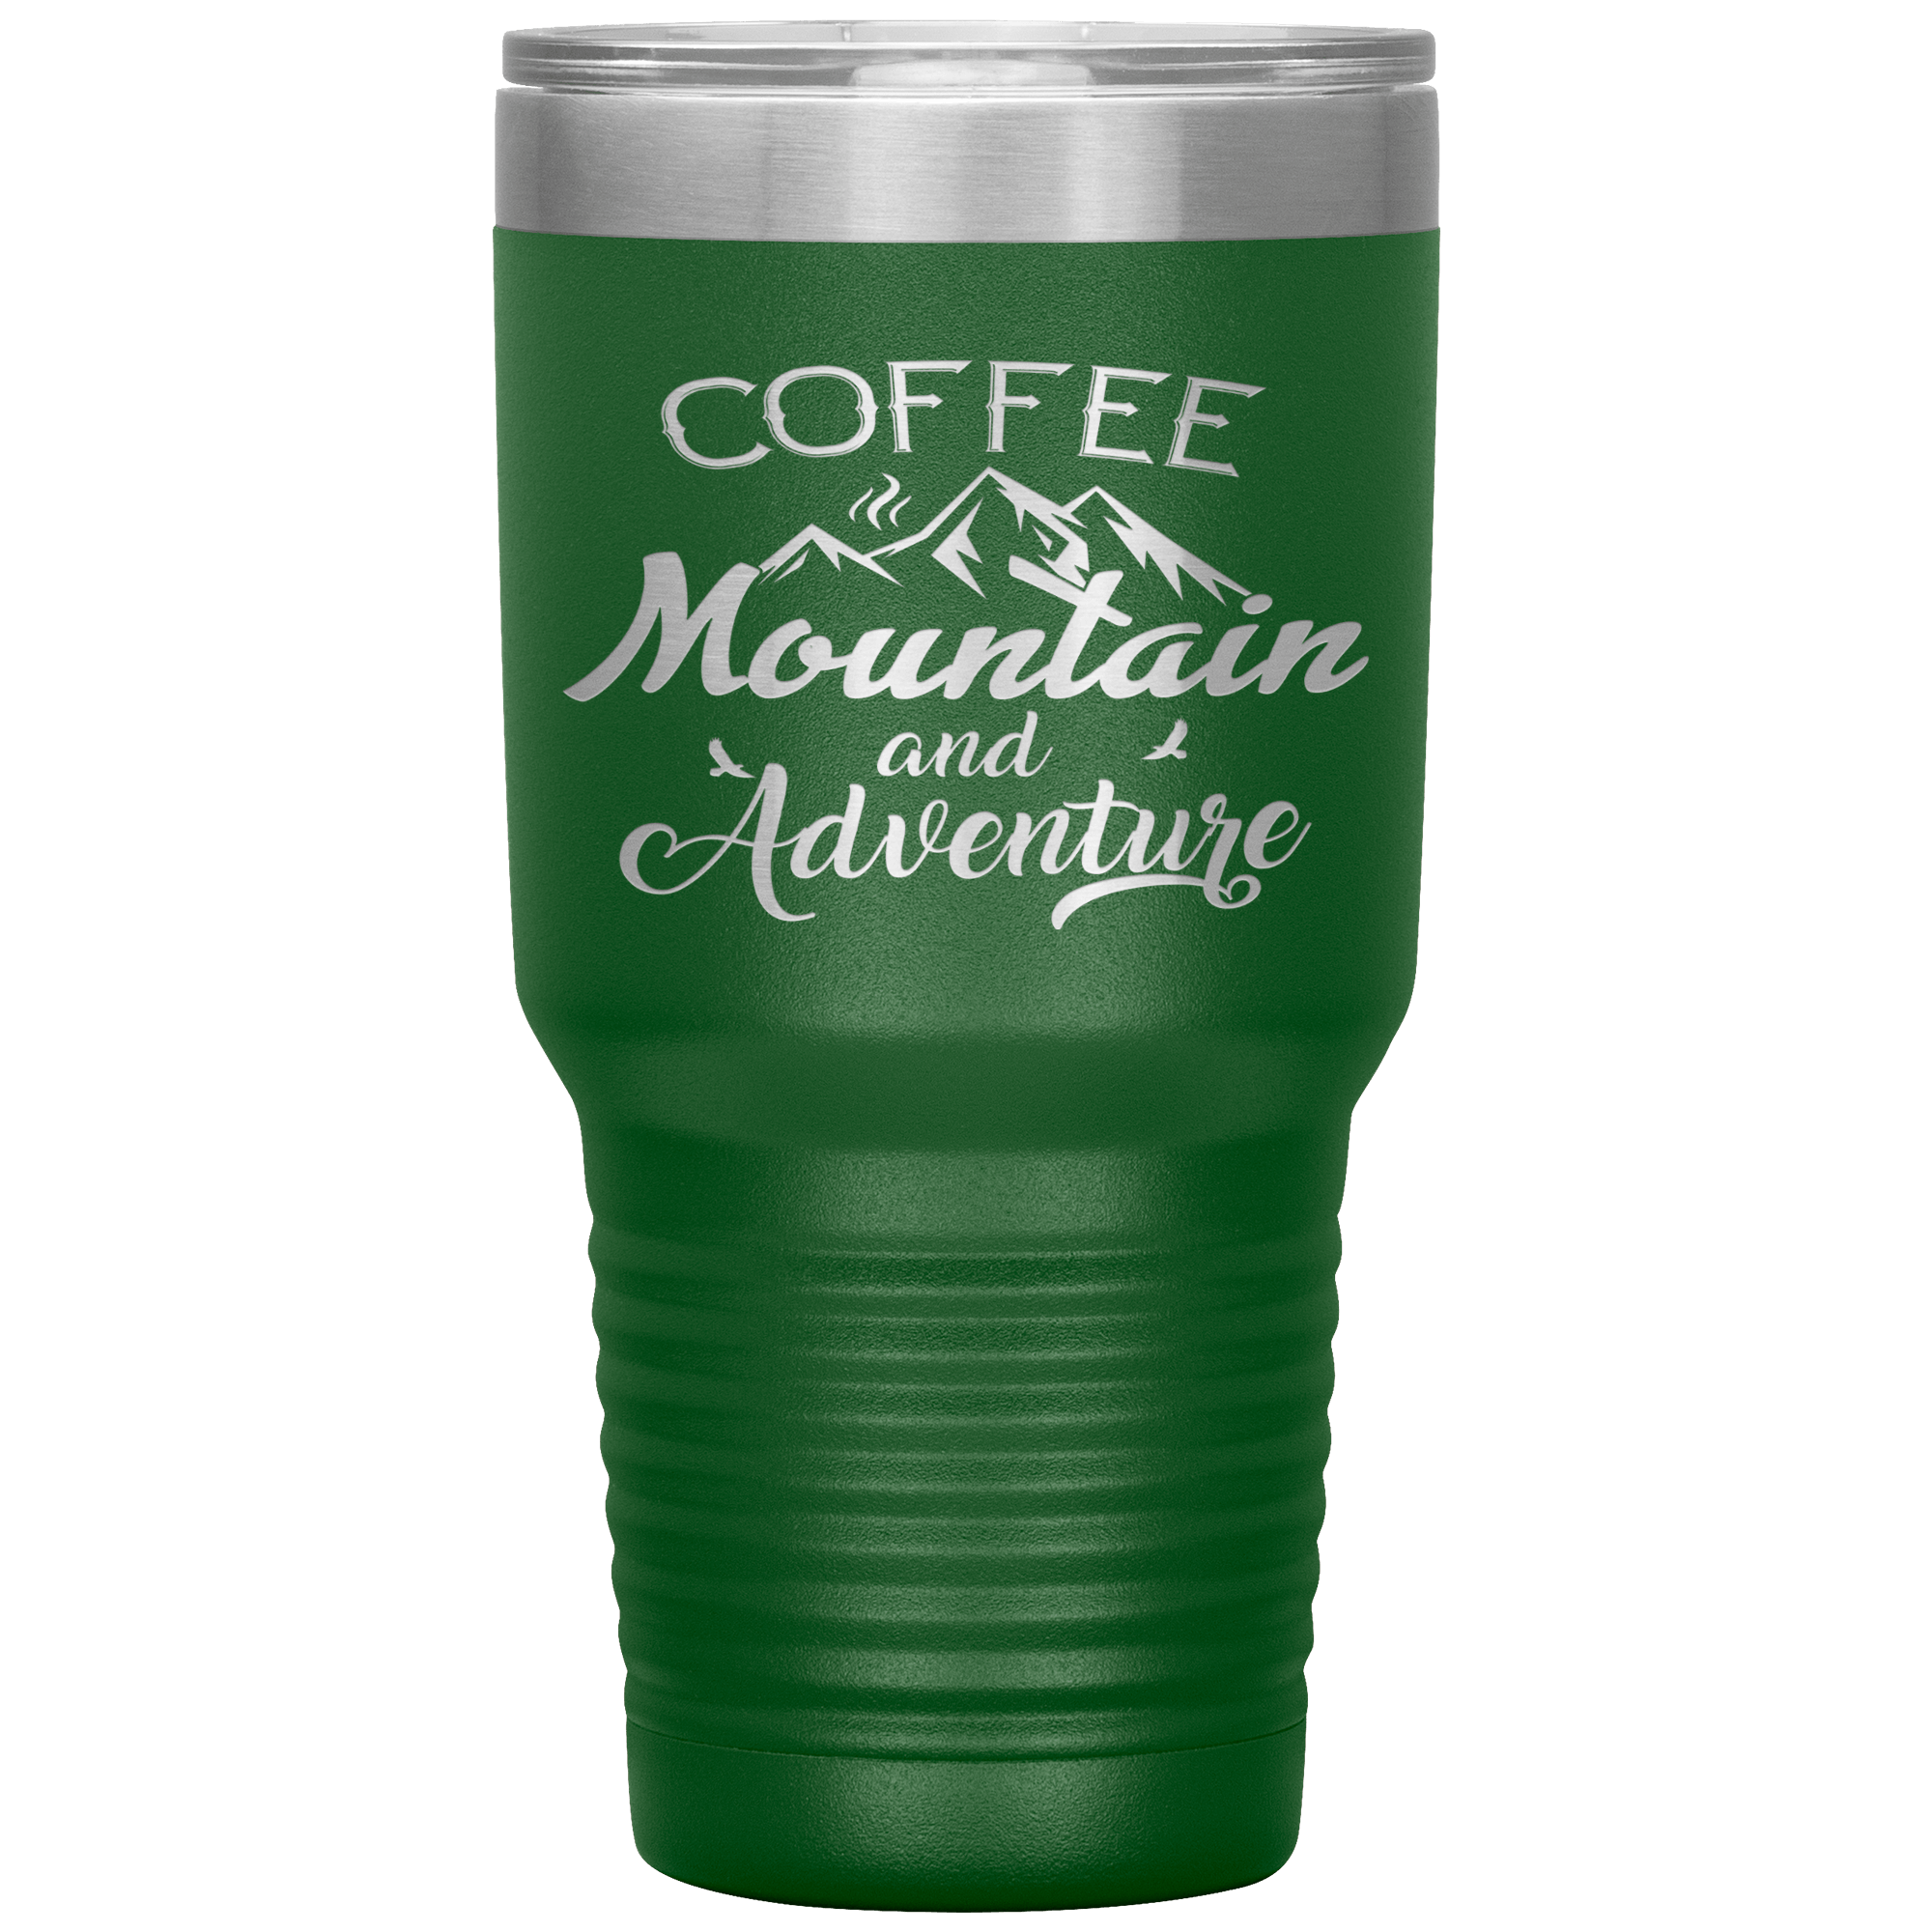 "COFFEE MOUNTAIN AND ADVENTURE"